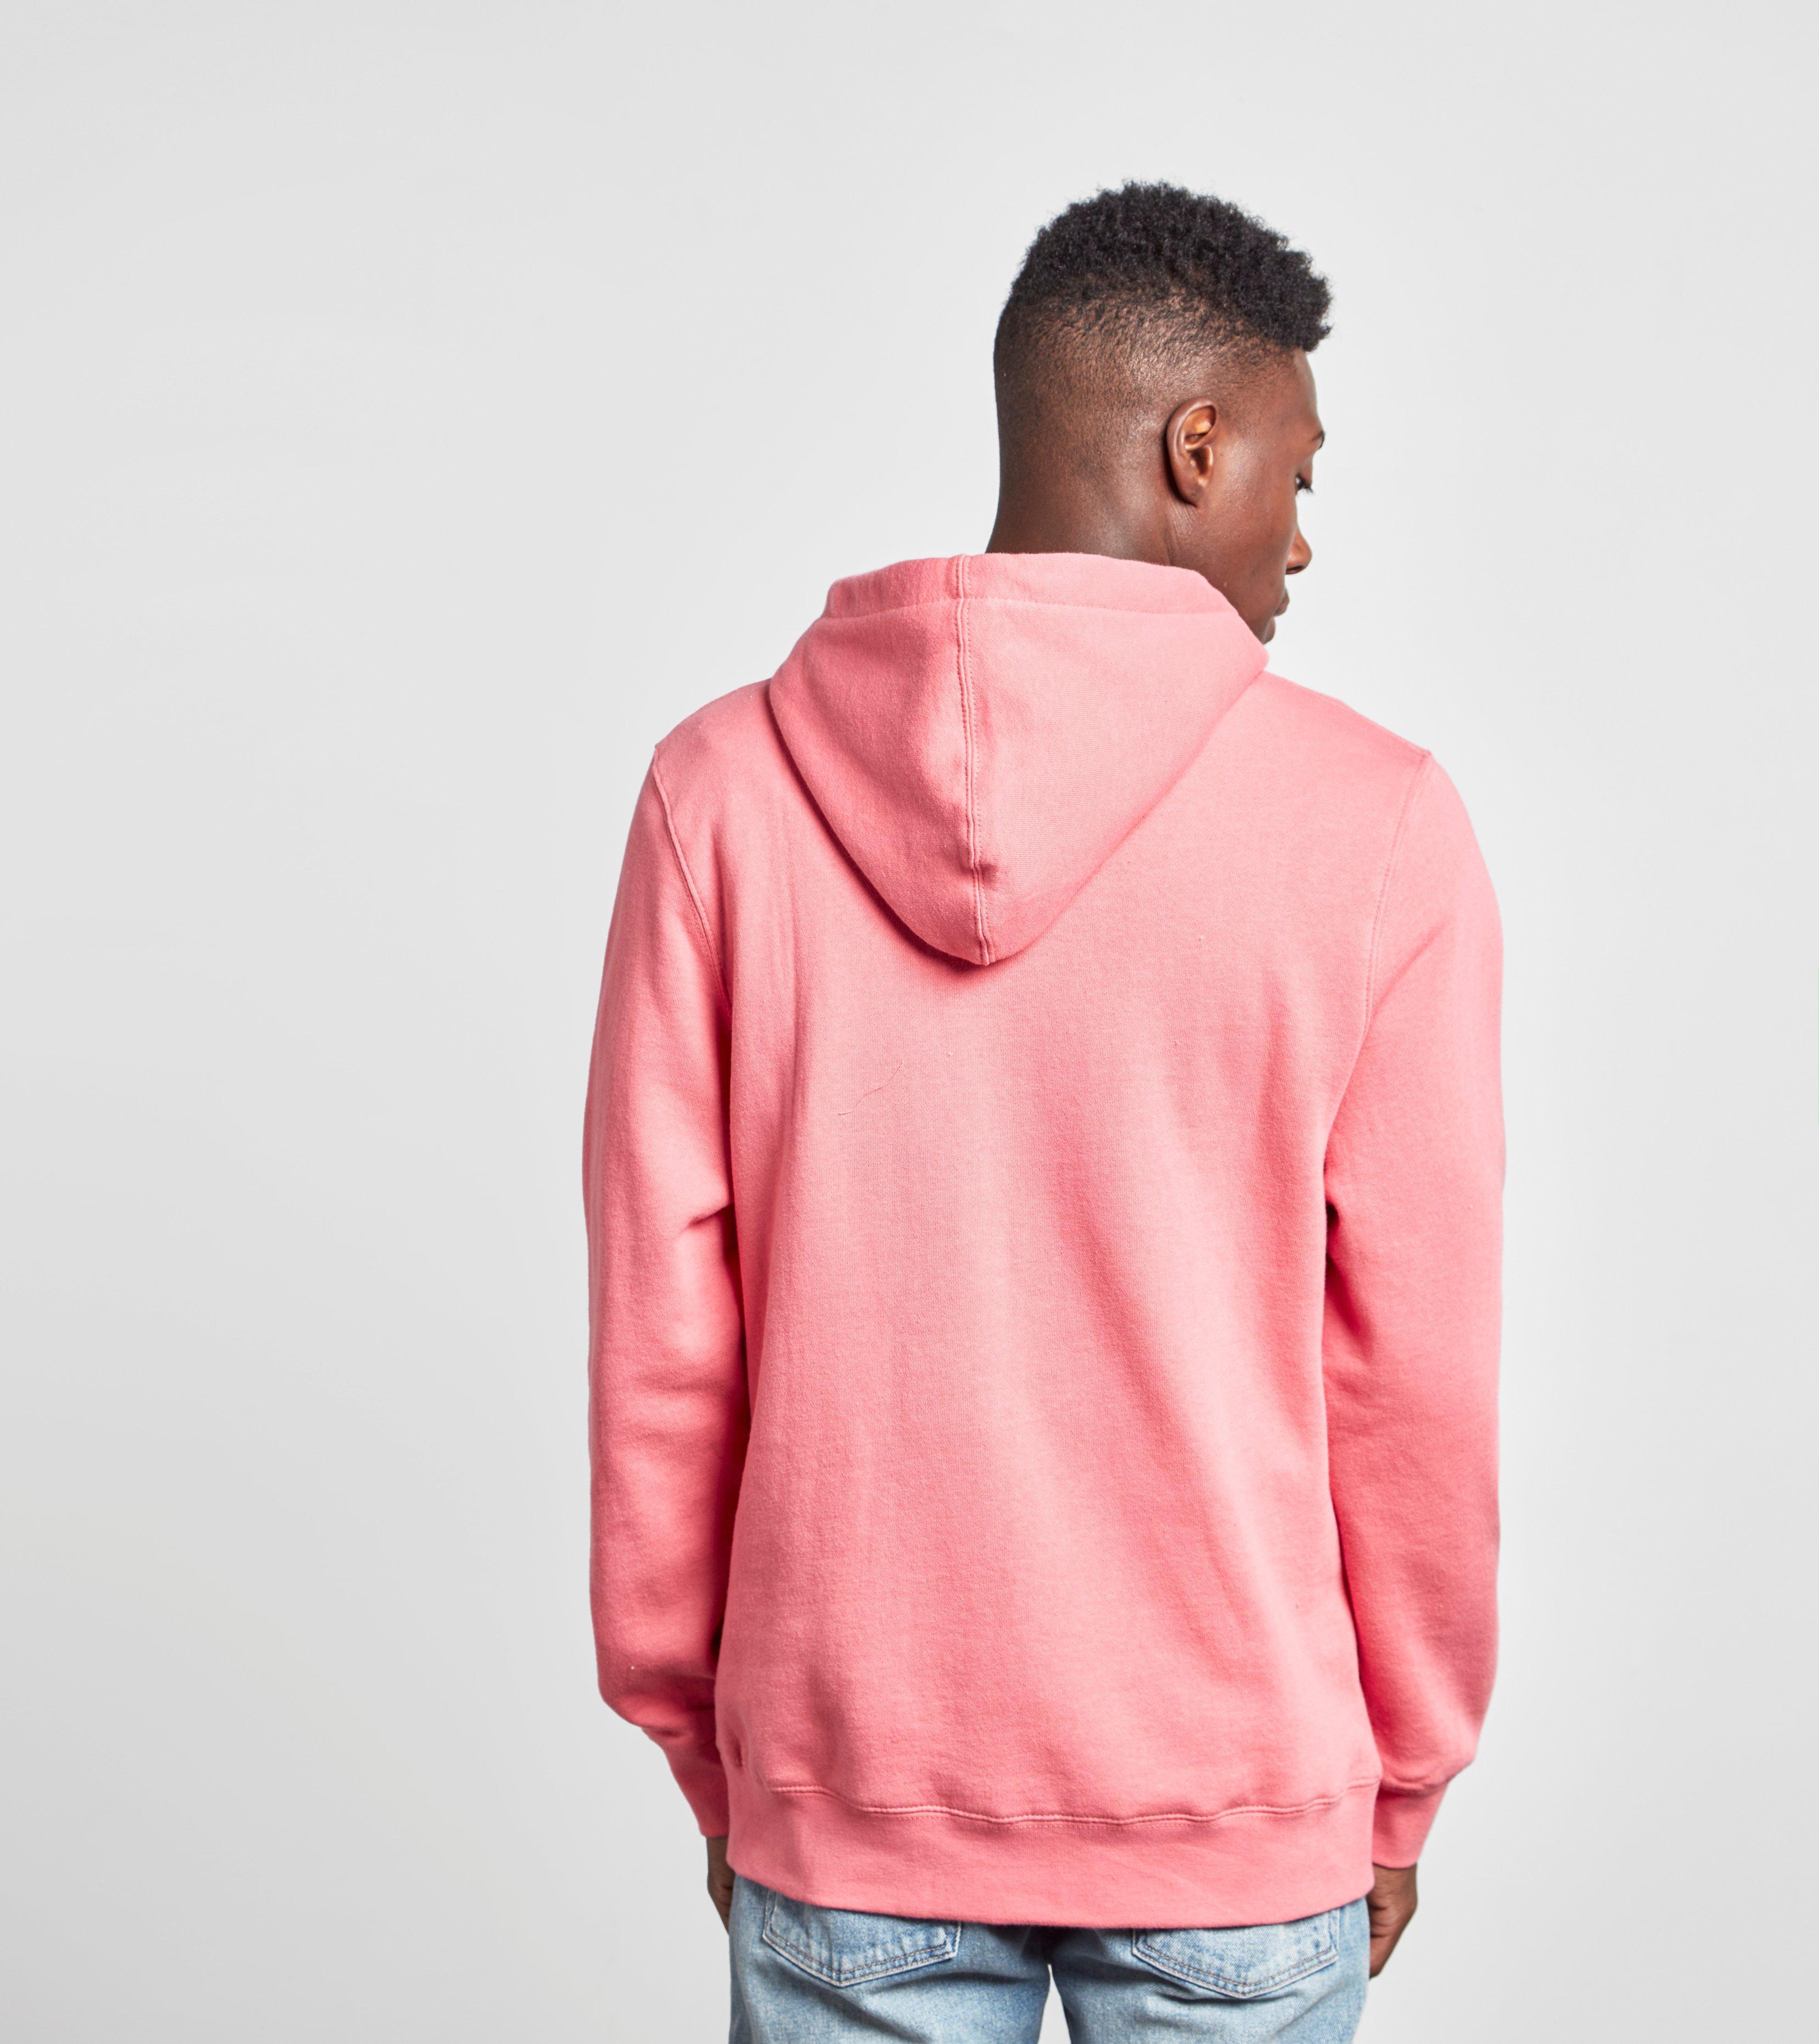 Lyst - Stussy New Stock Hoody in Pink for Men